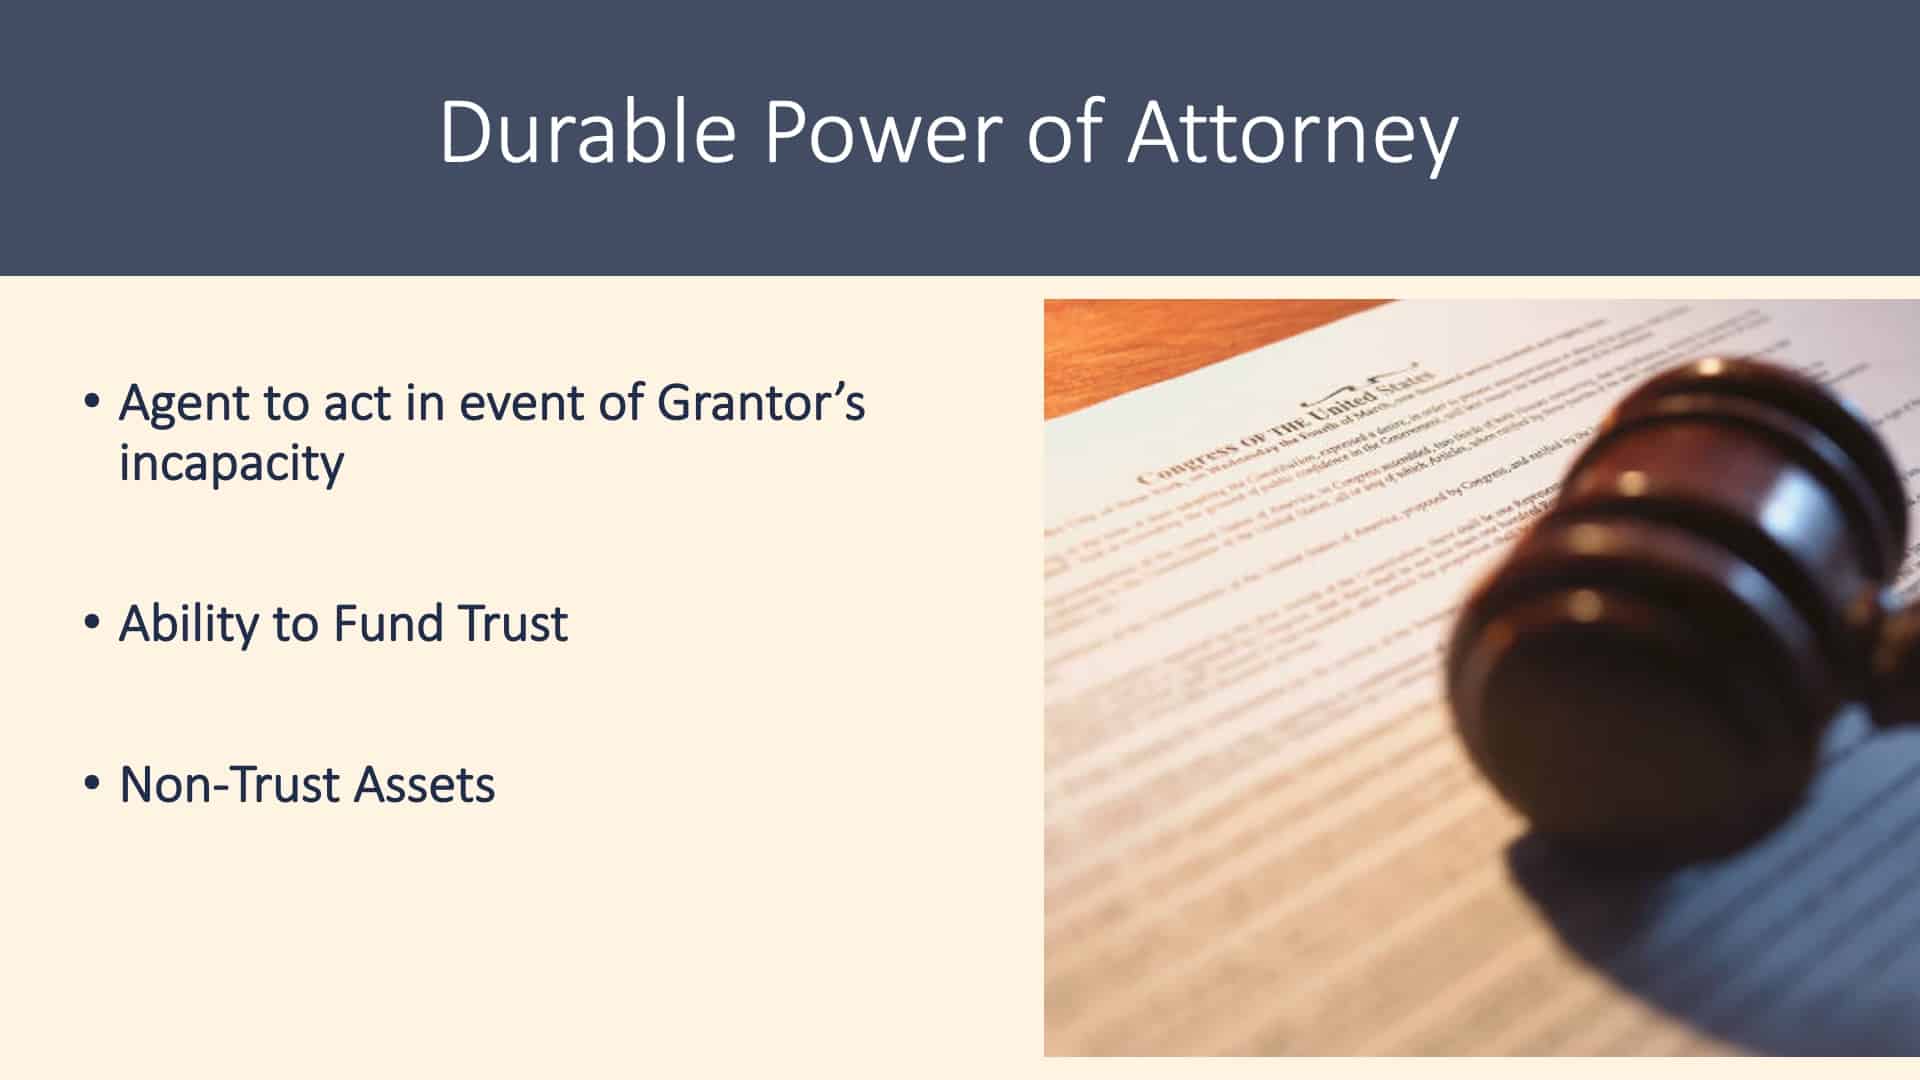 Is a Will Enough - Durable Power of Attorney